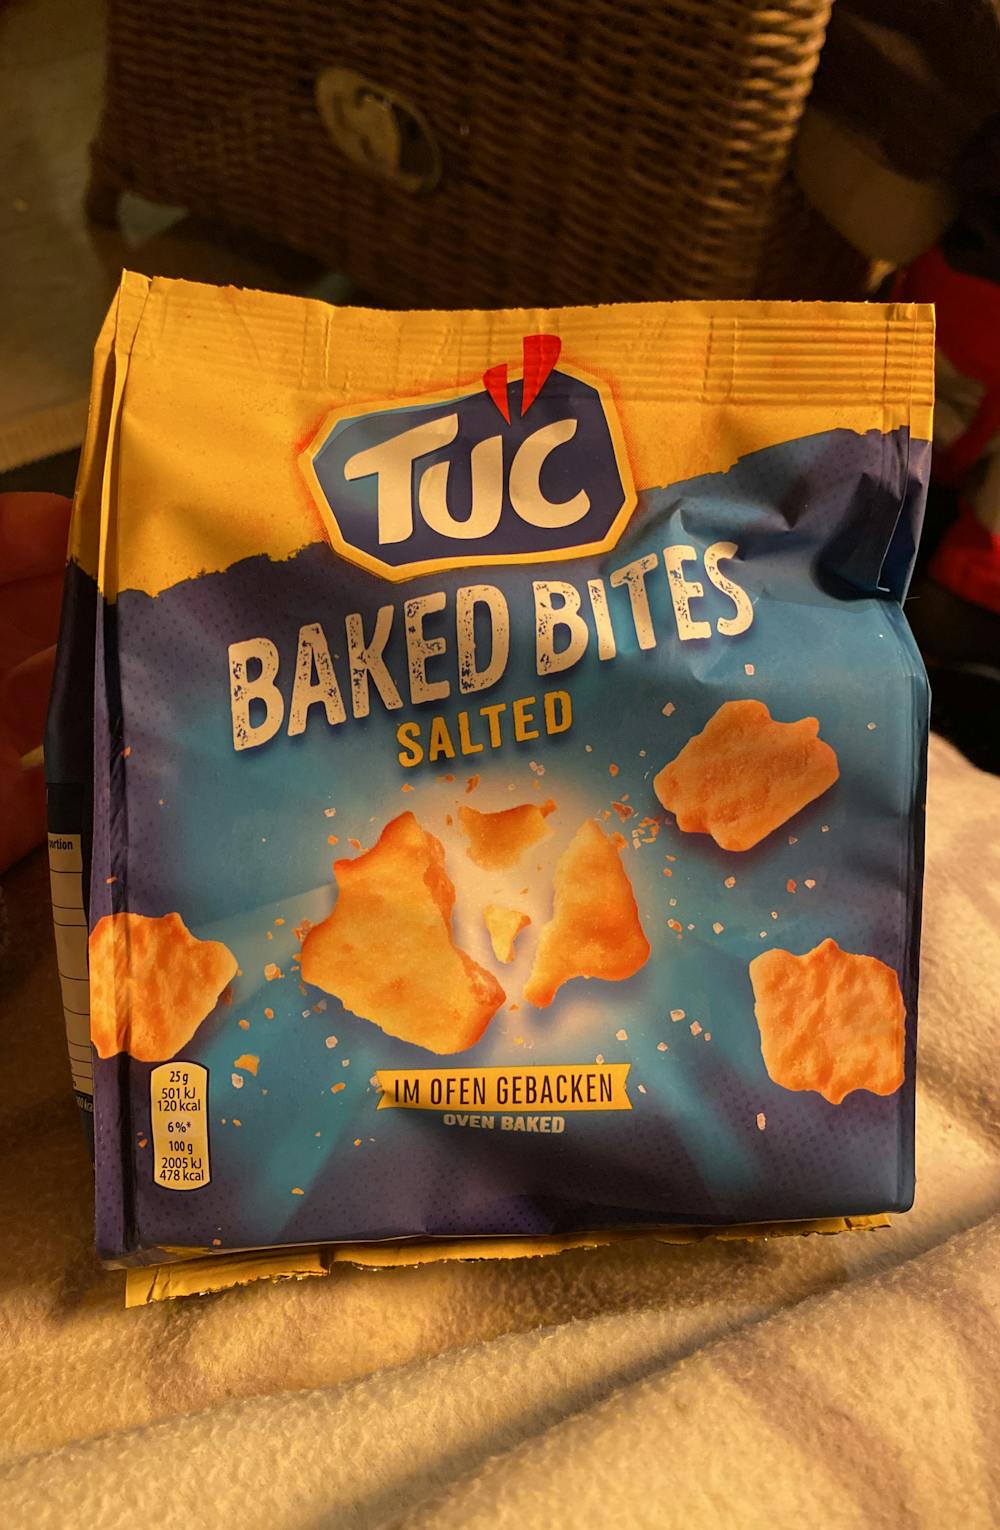 Baked bites, salted, Tuc